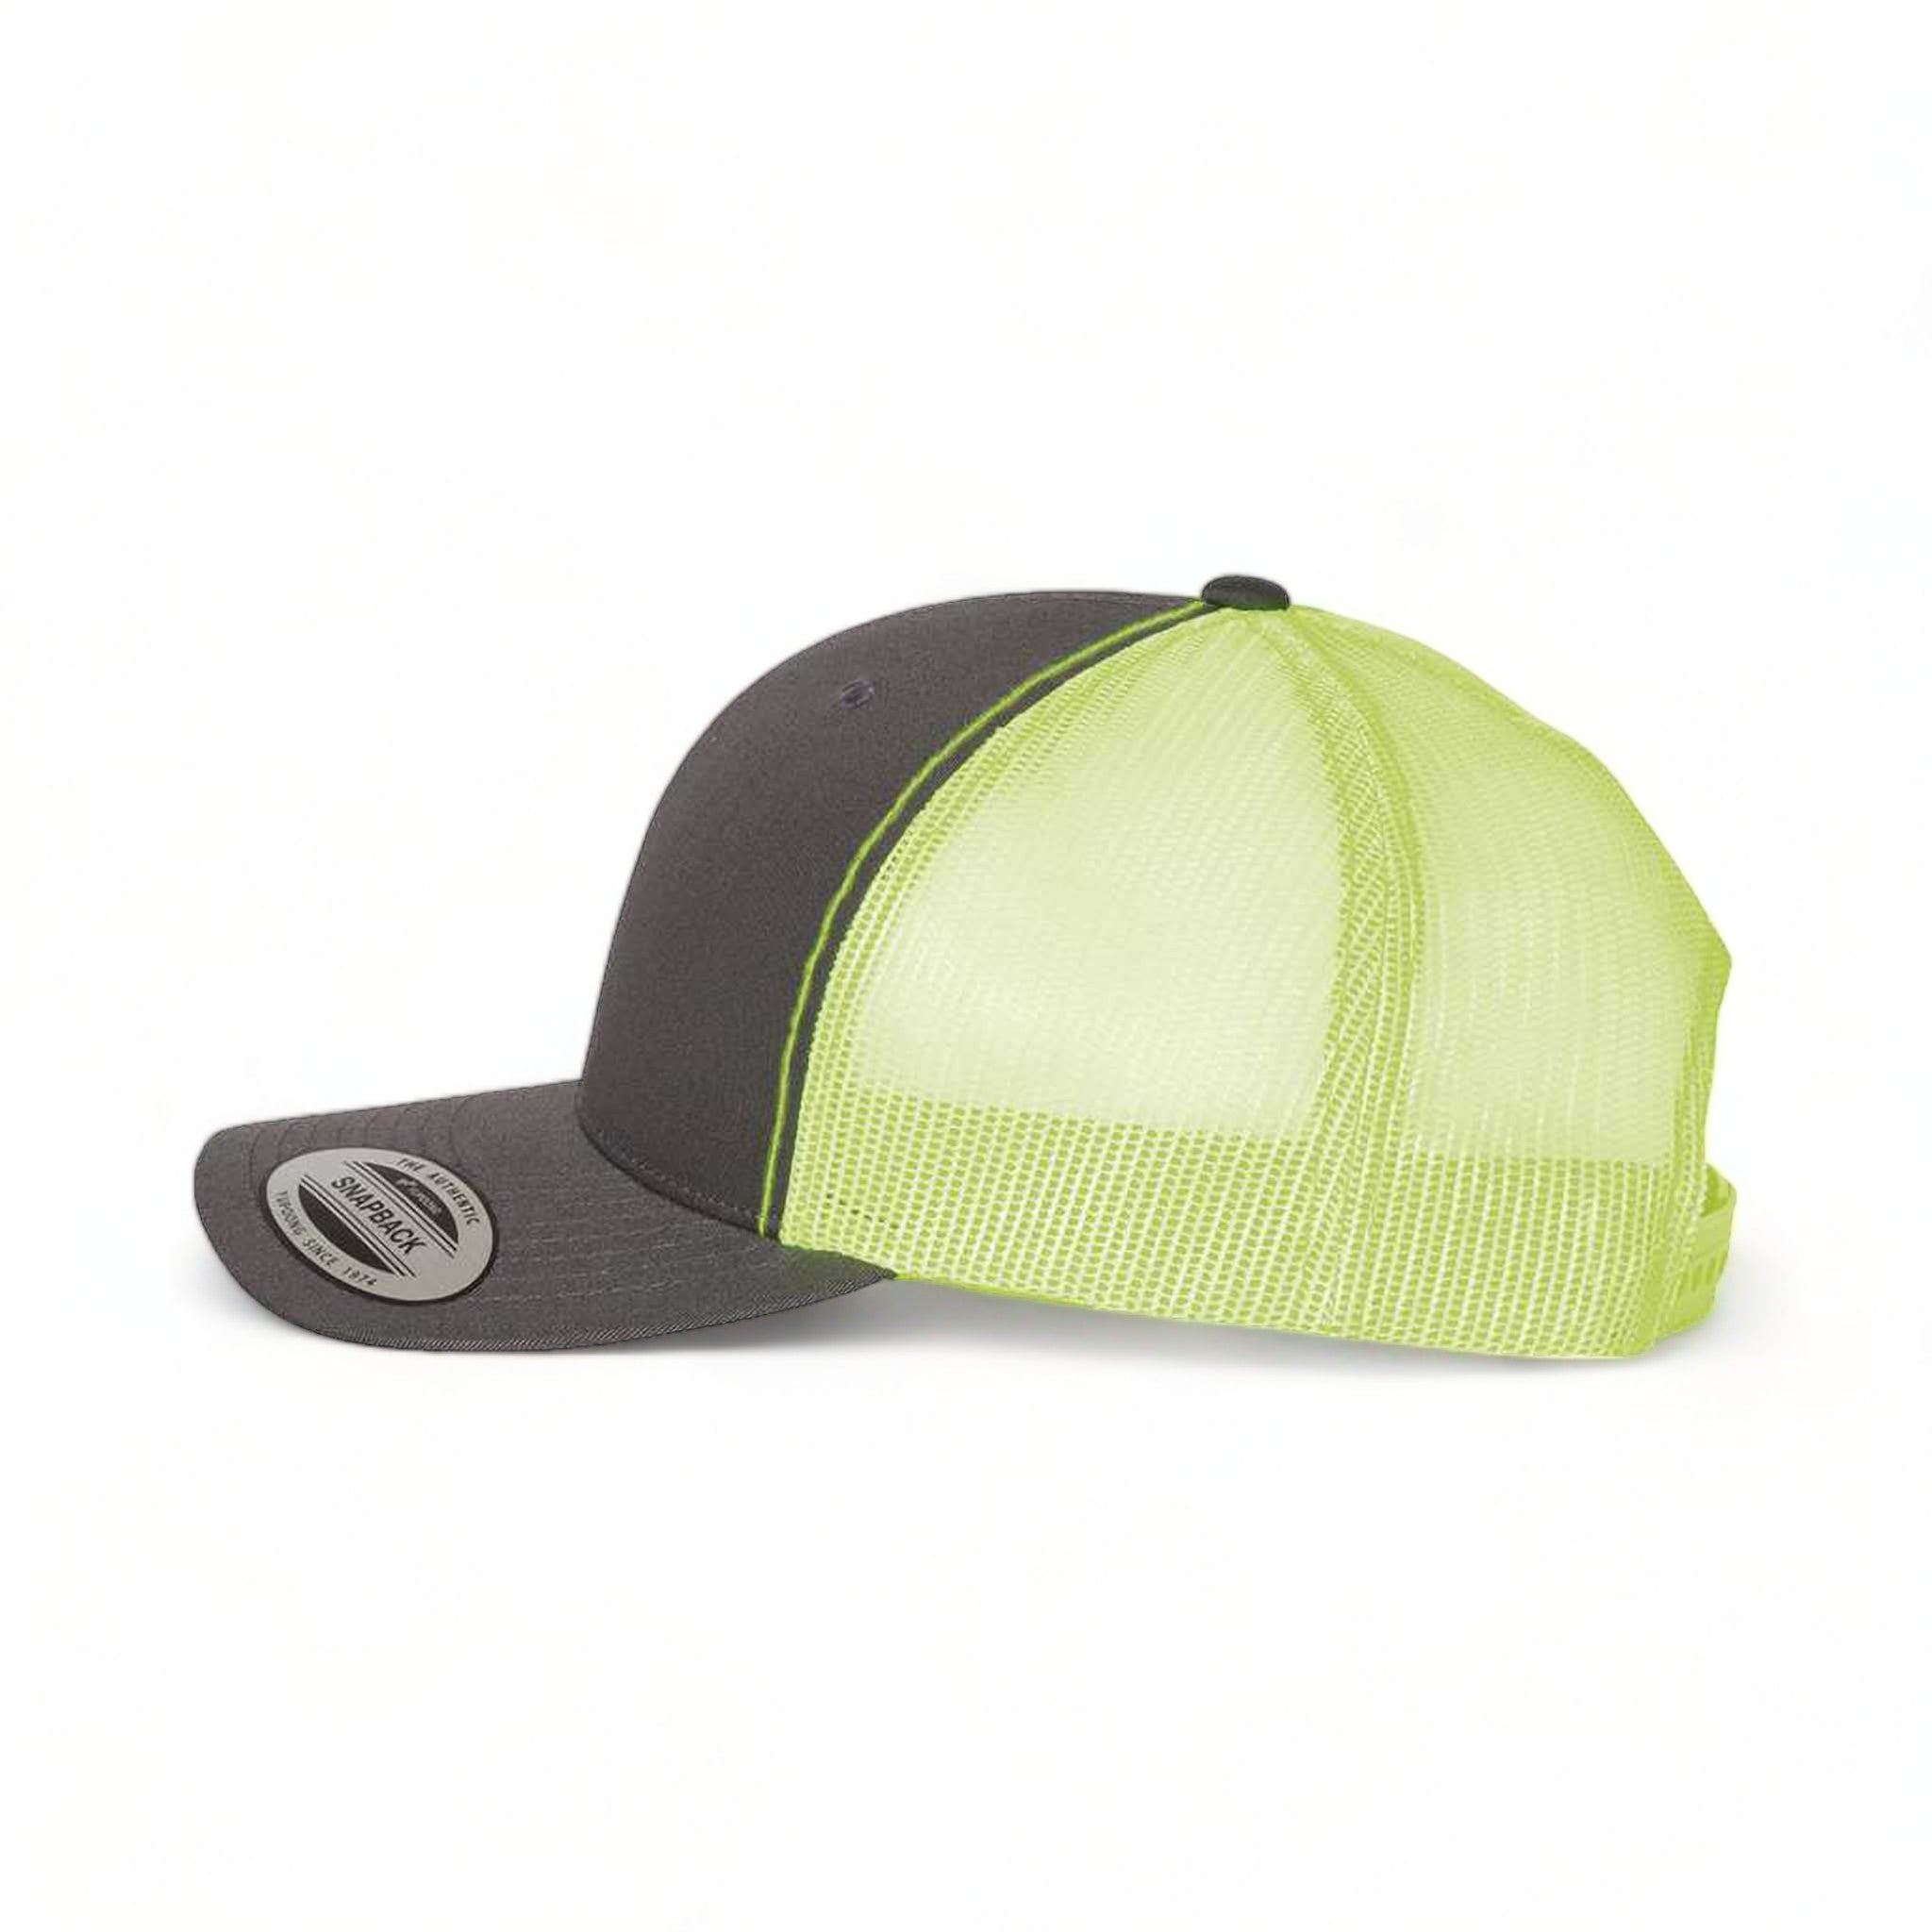 Side view of YP Classics 6606 custom hat in charcoal and neon green